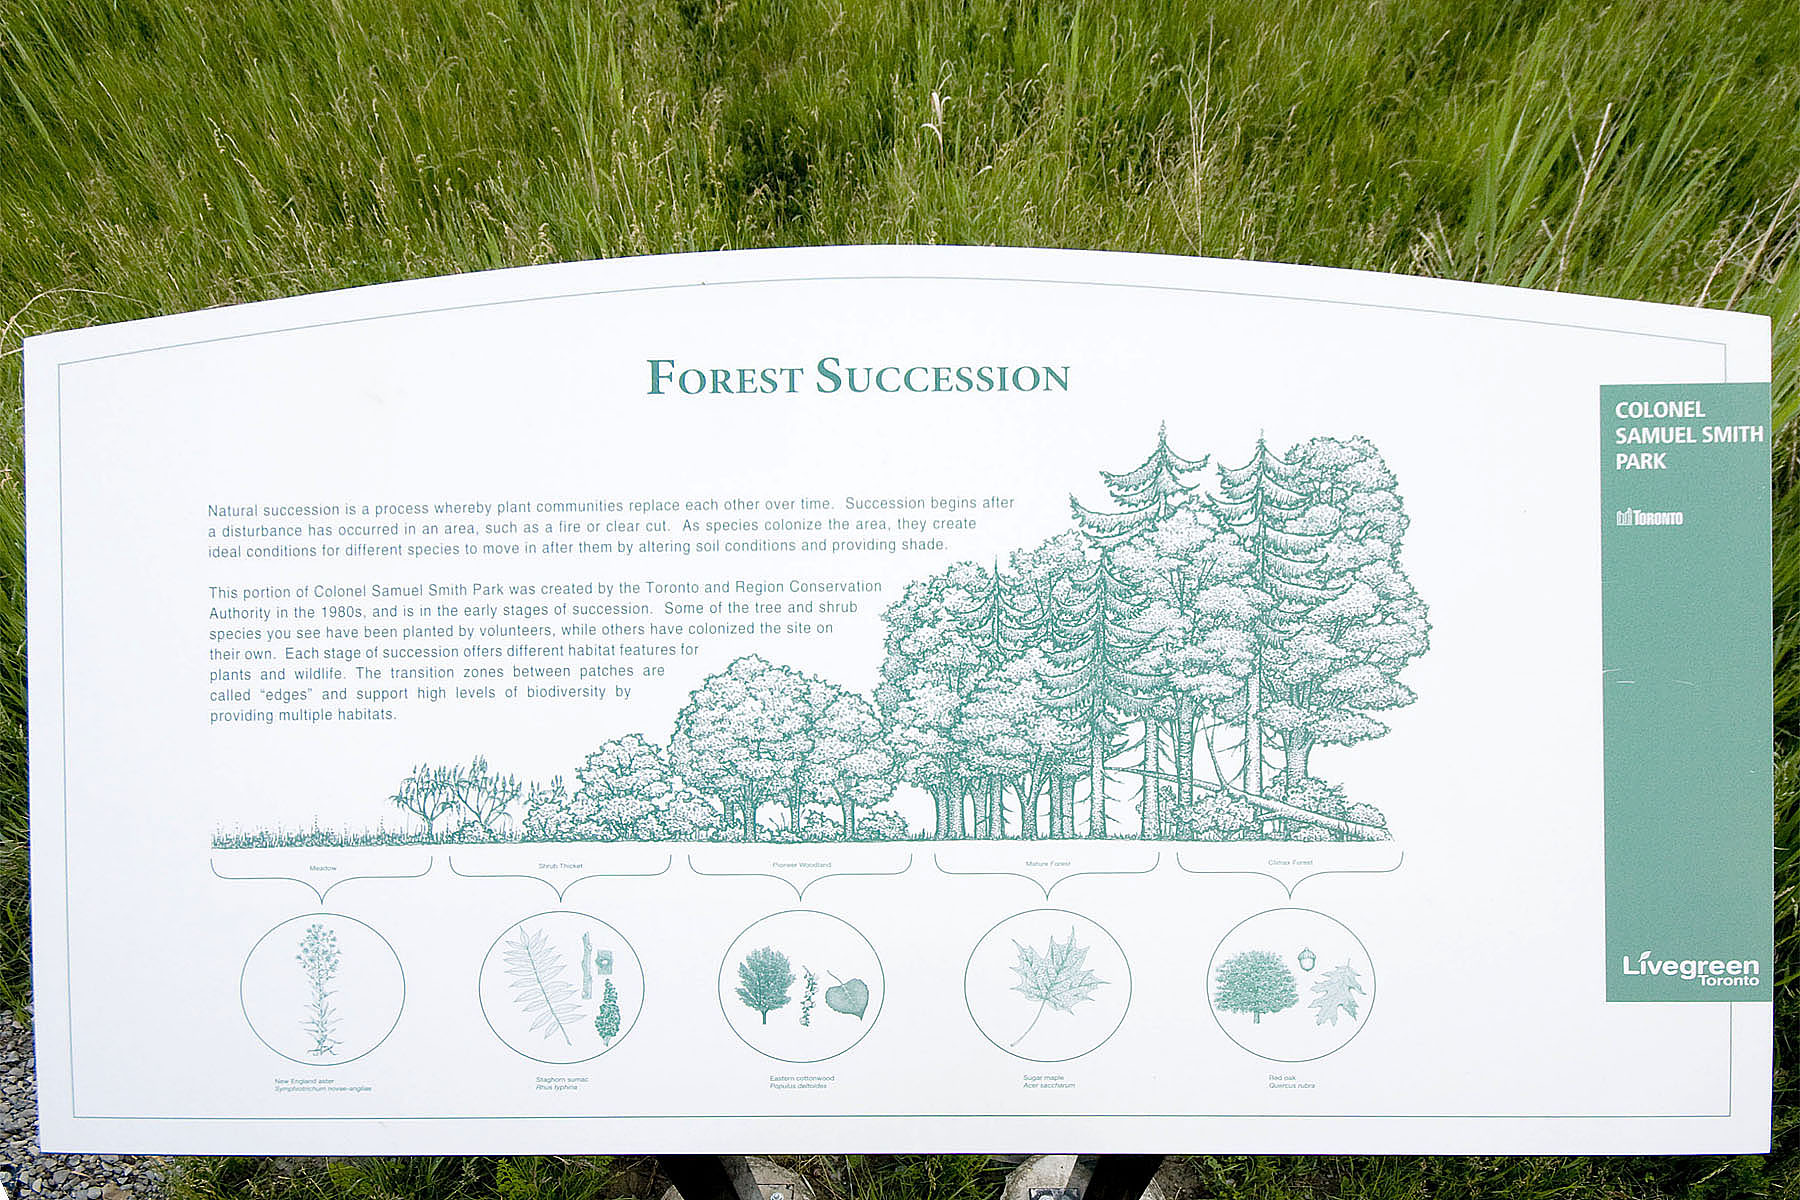 Forest succession